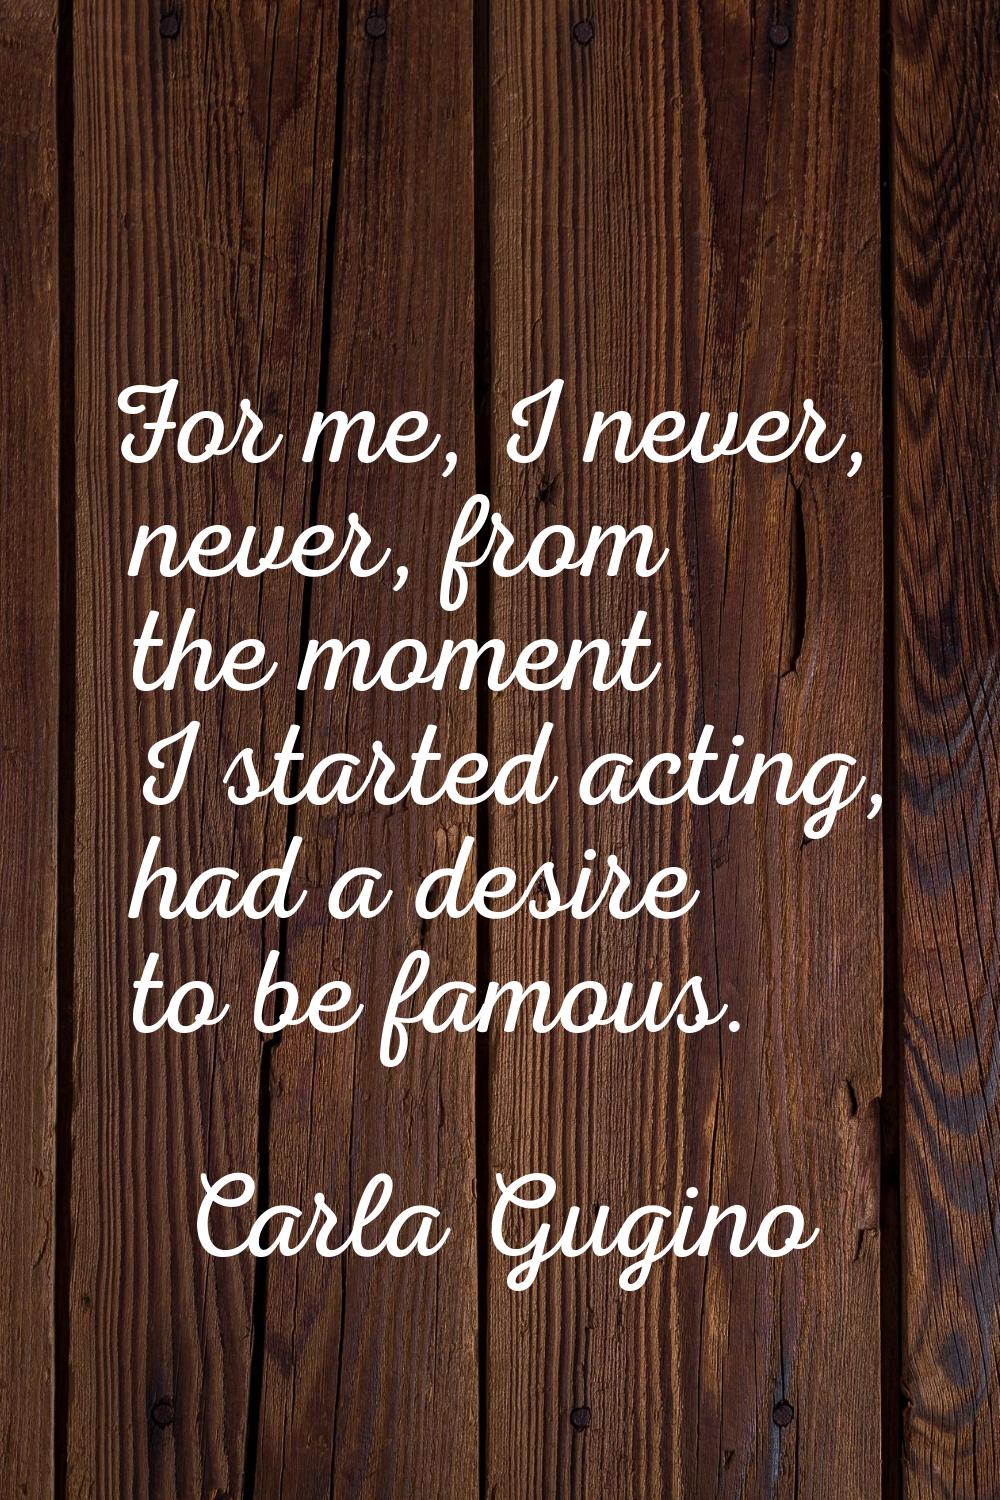 For me, I never, never, from the moment I started acting, had a desire to be famous.